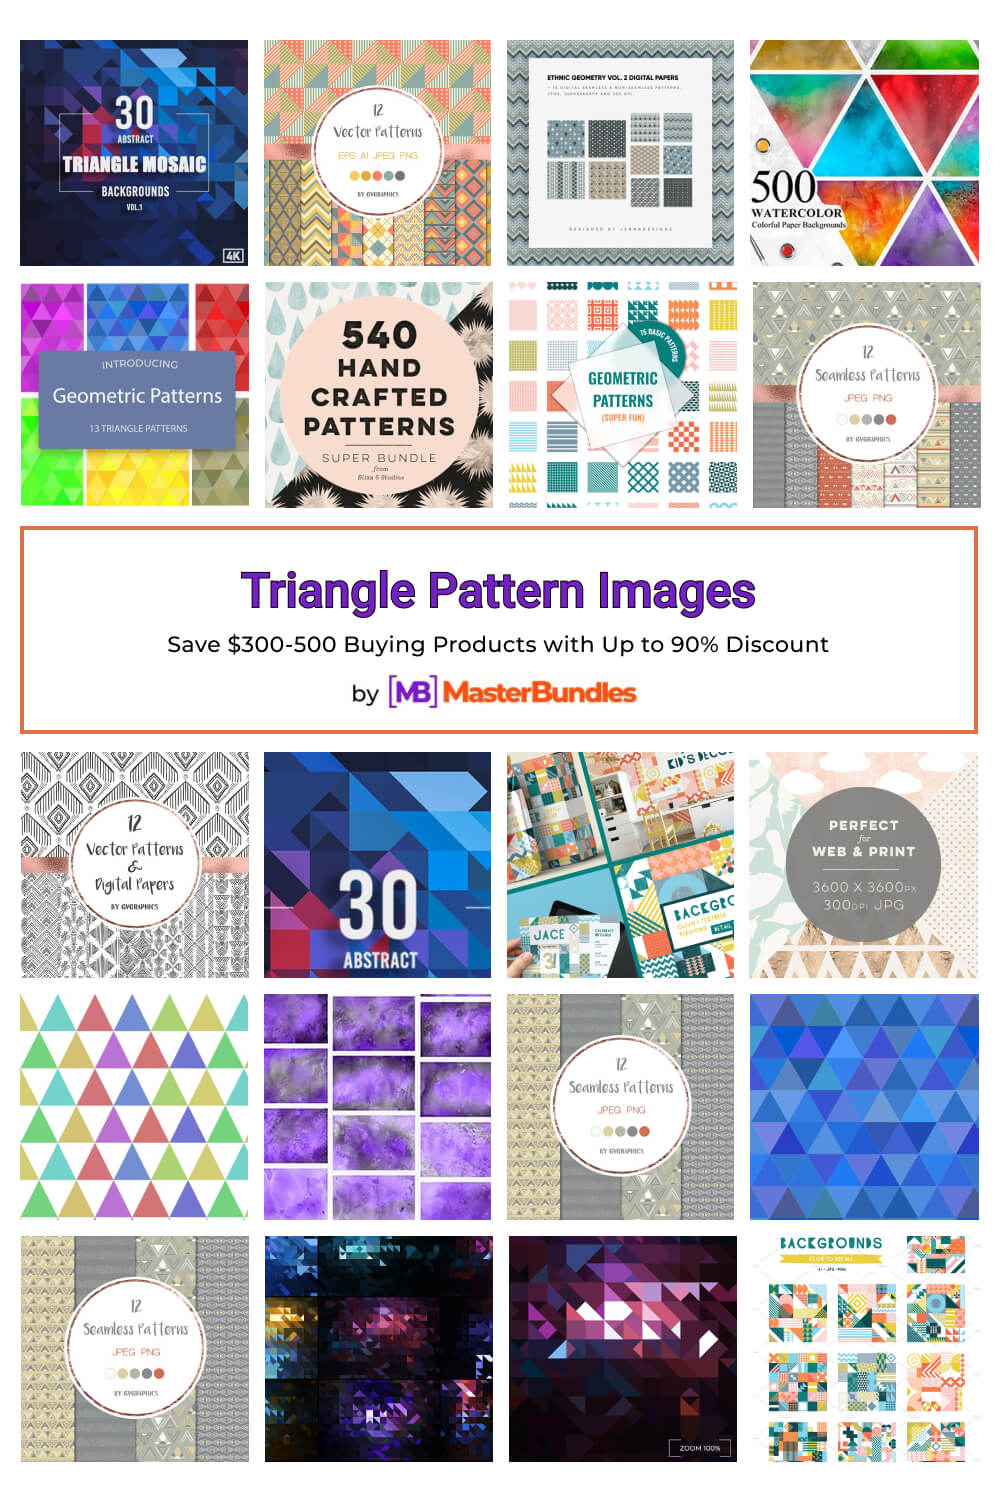 triangle pattern images pinterest image.